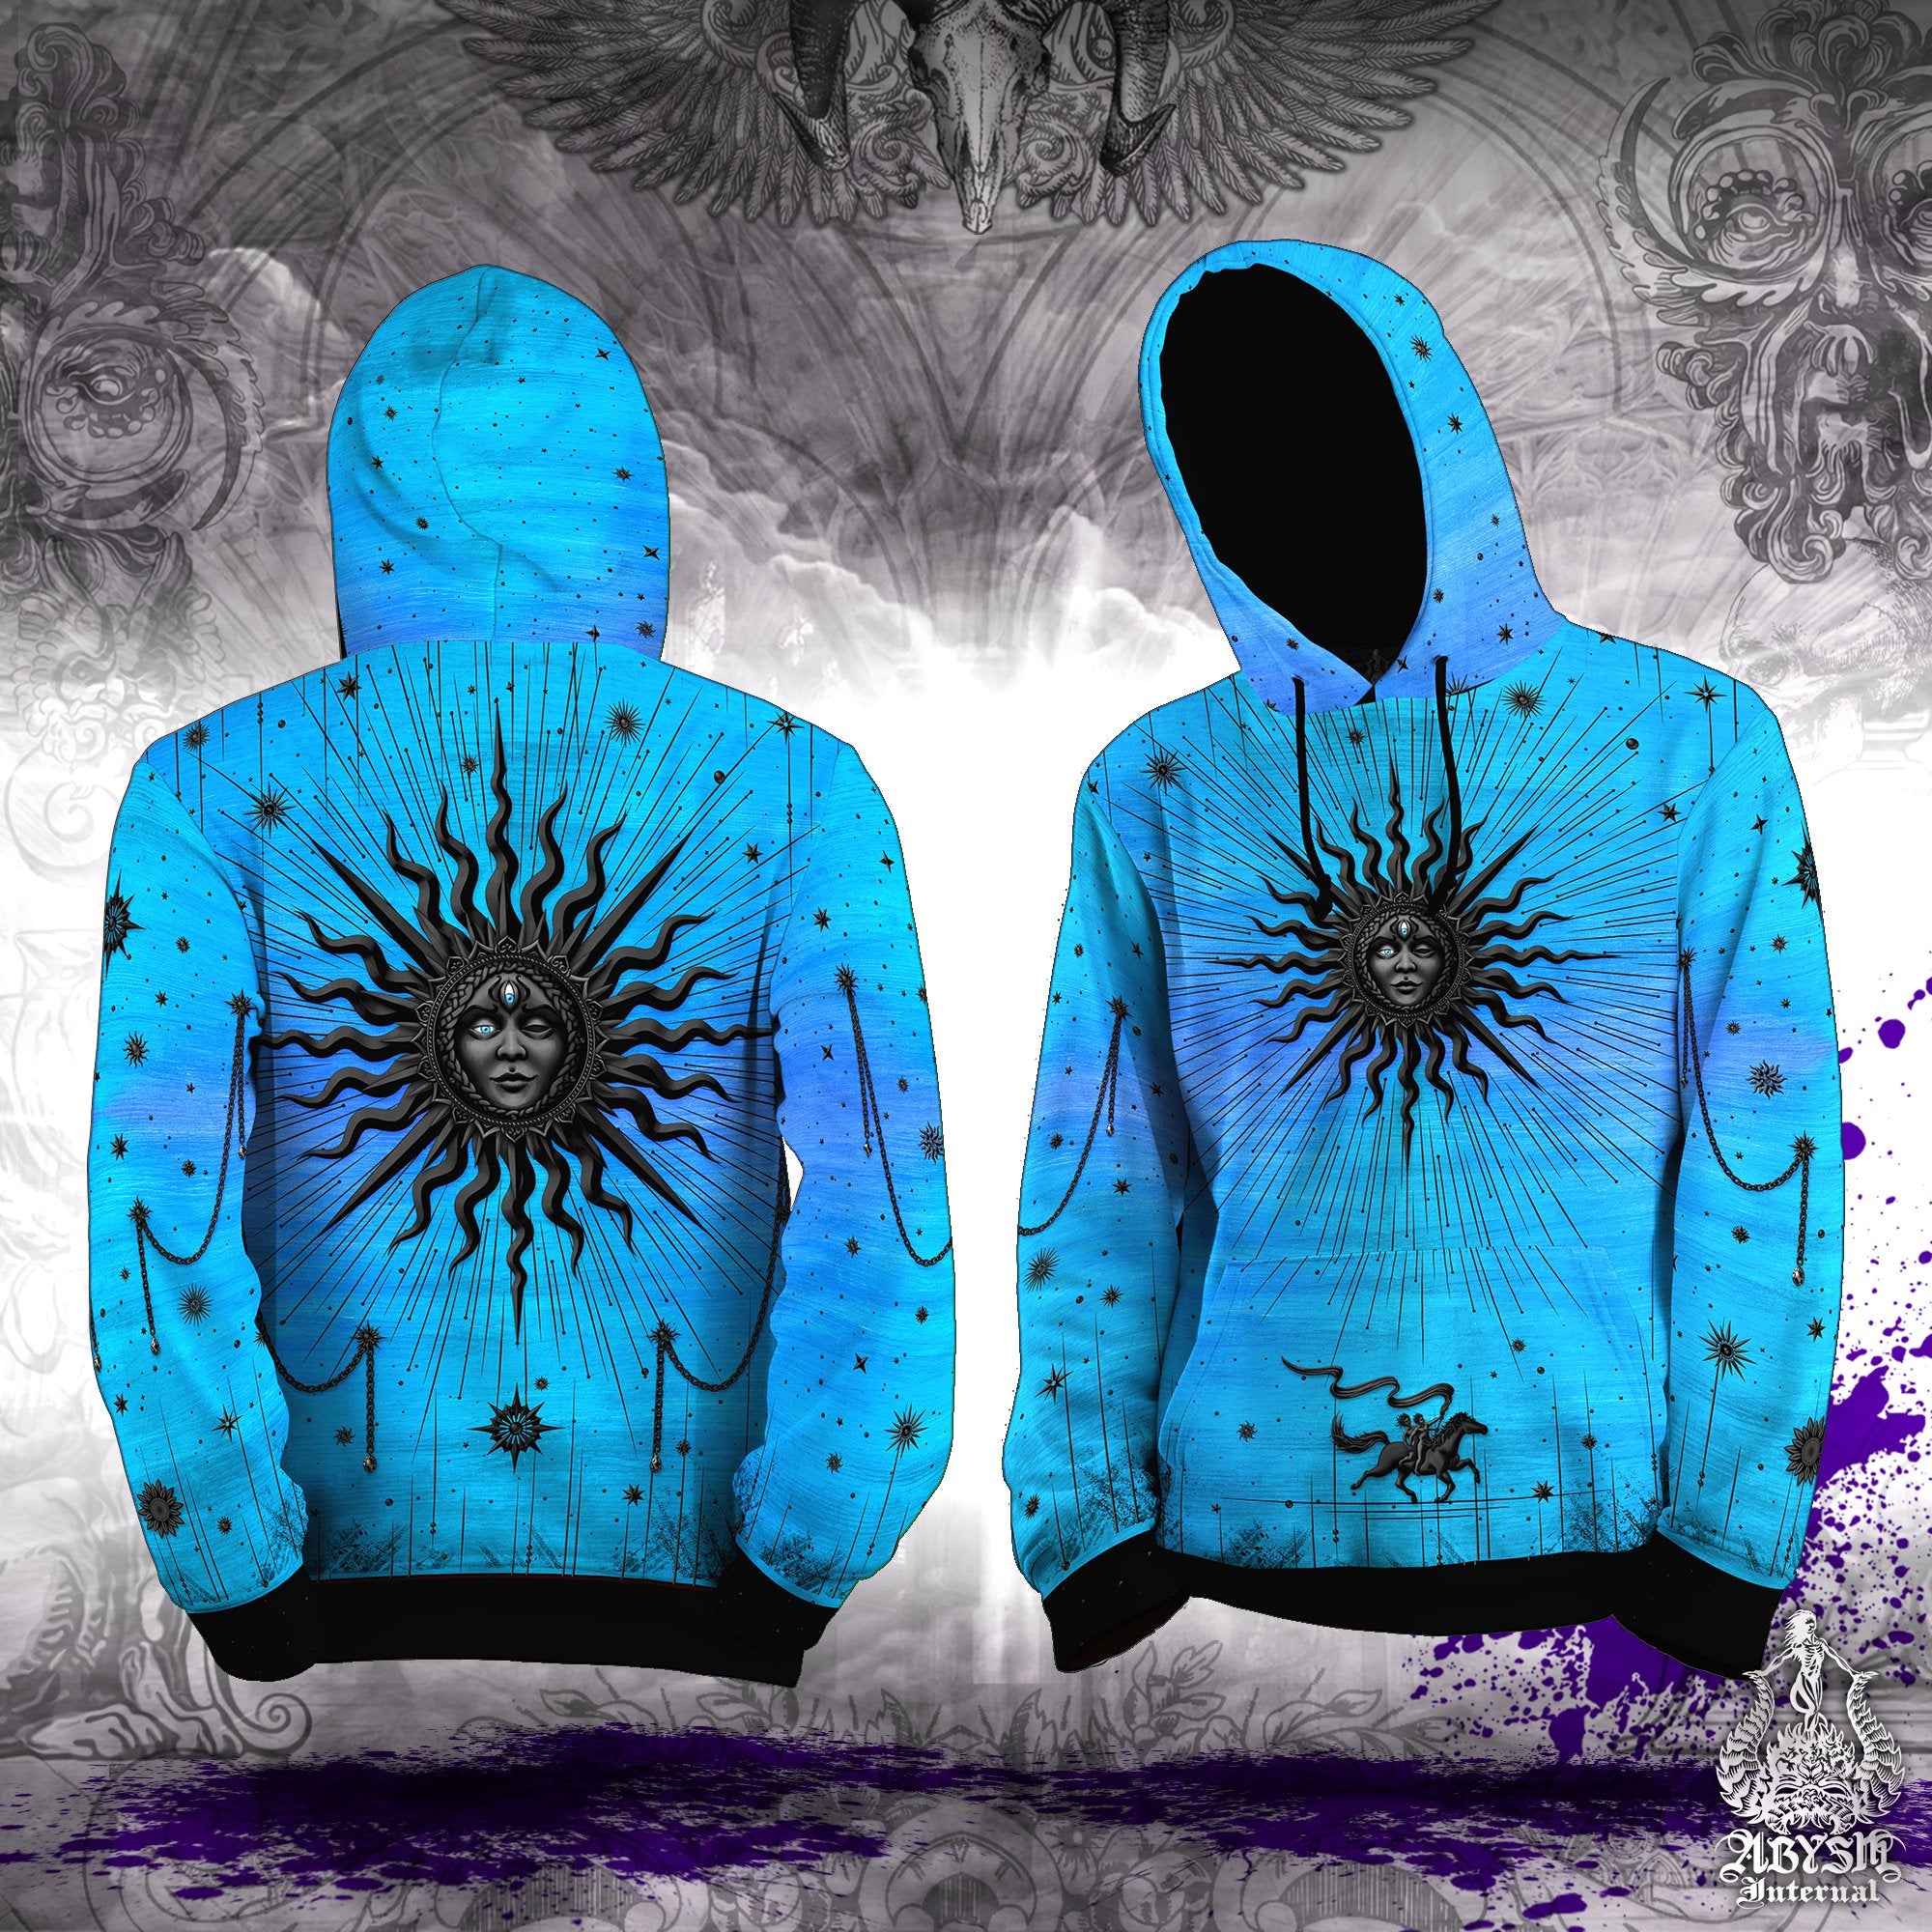 Witchy Sun Hoodie, Witch Outfit, Tarot Arcana Pullover, Indie Sweater, Esoteric Party, Festival Streetwear, Alternative Clothing, Unisex - Cyan Black - Abysm Internal